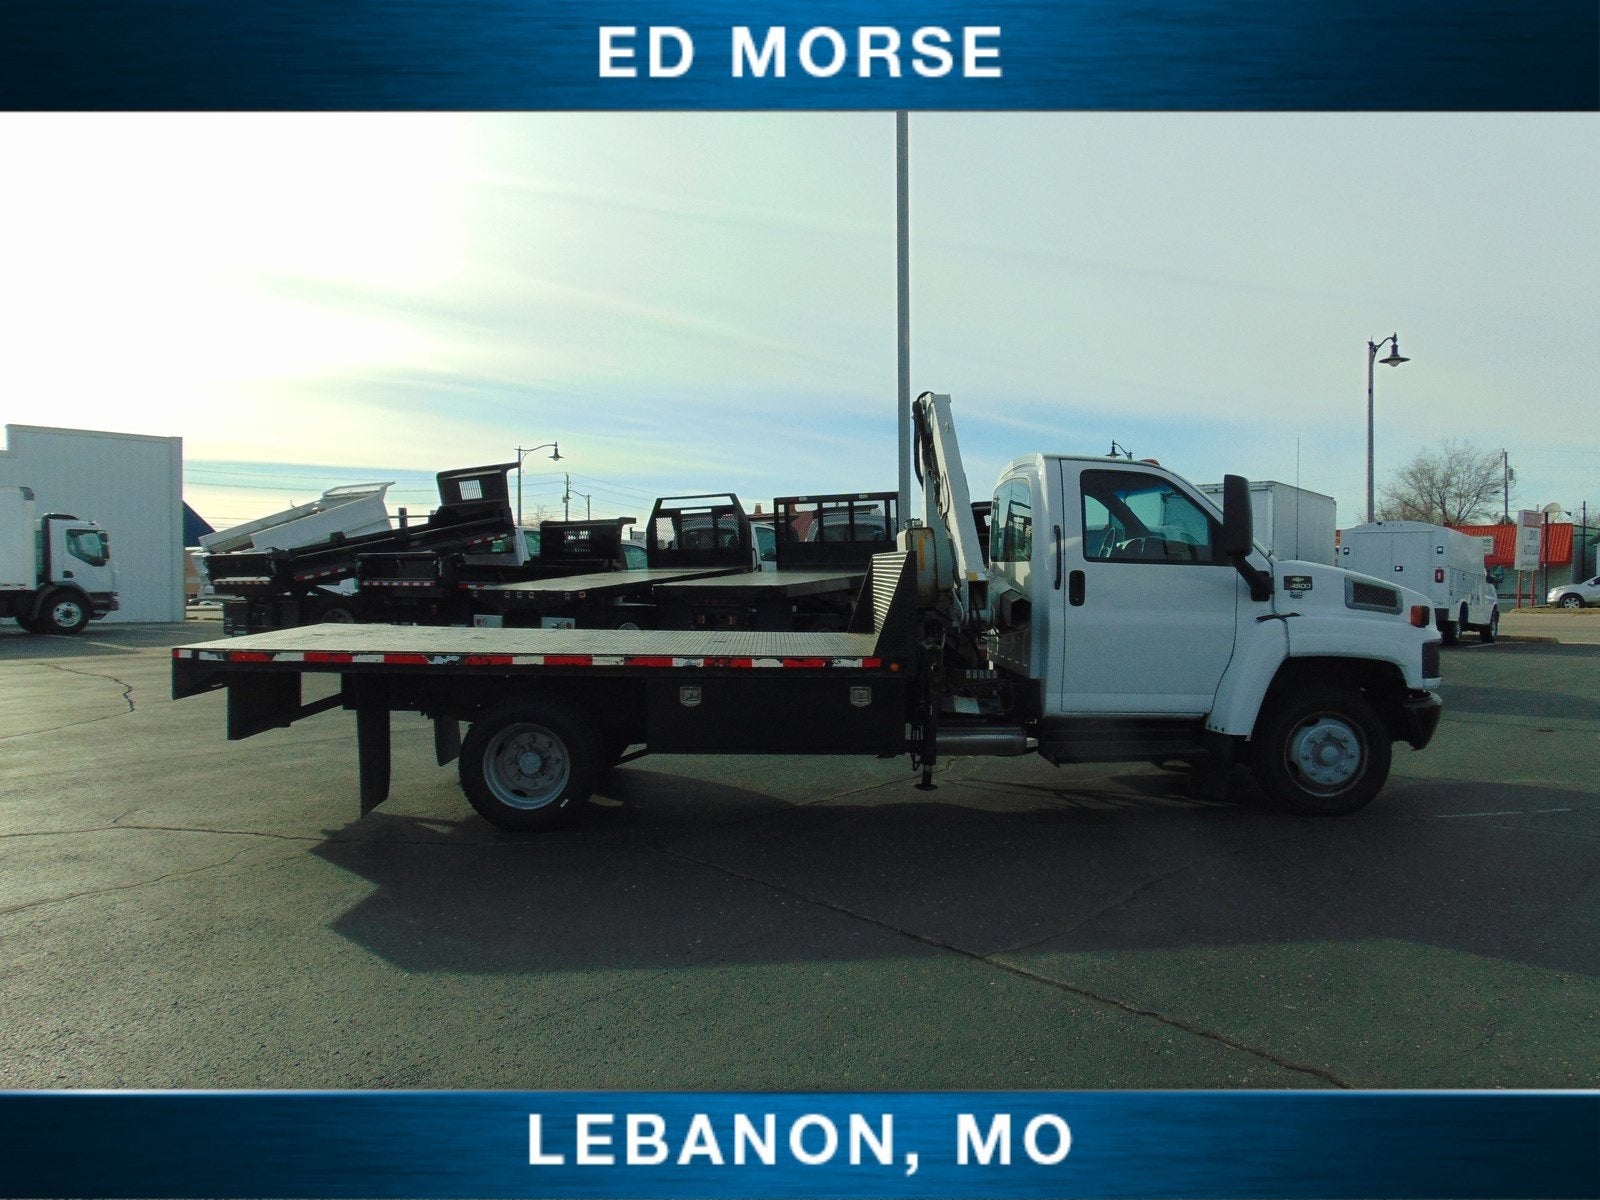 2003 Chevrolet CC4500 14' Flat Bed with Crane